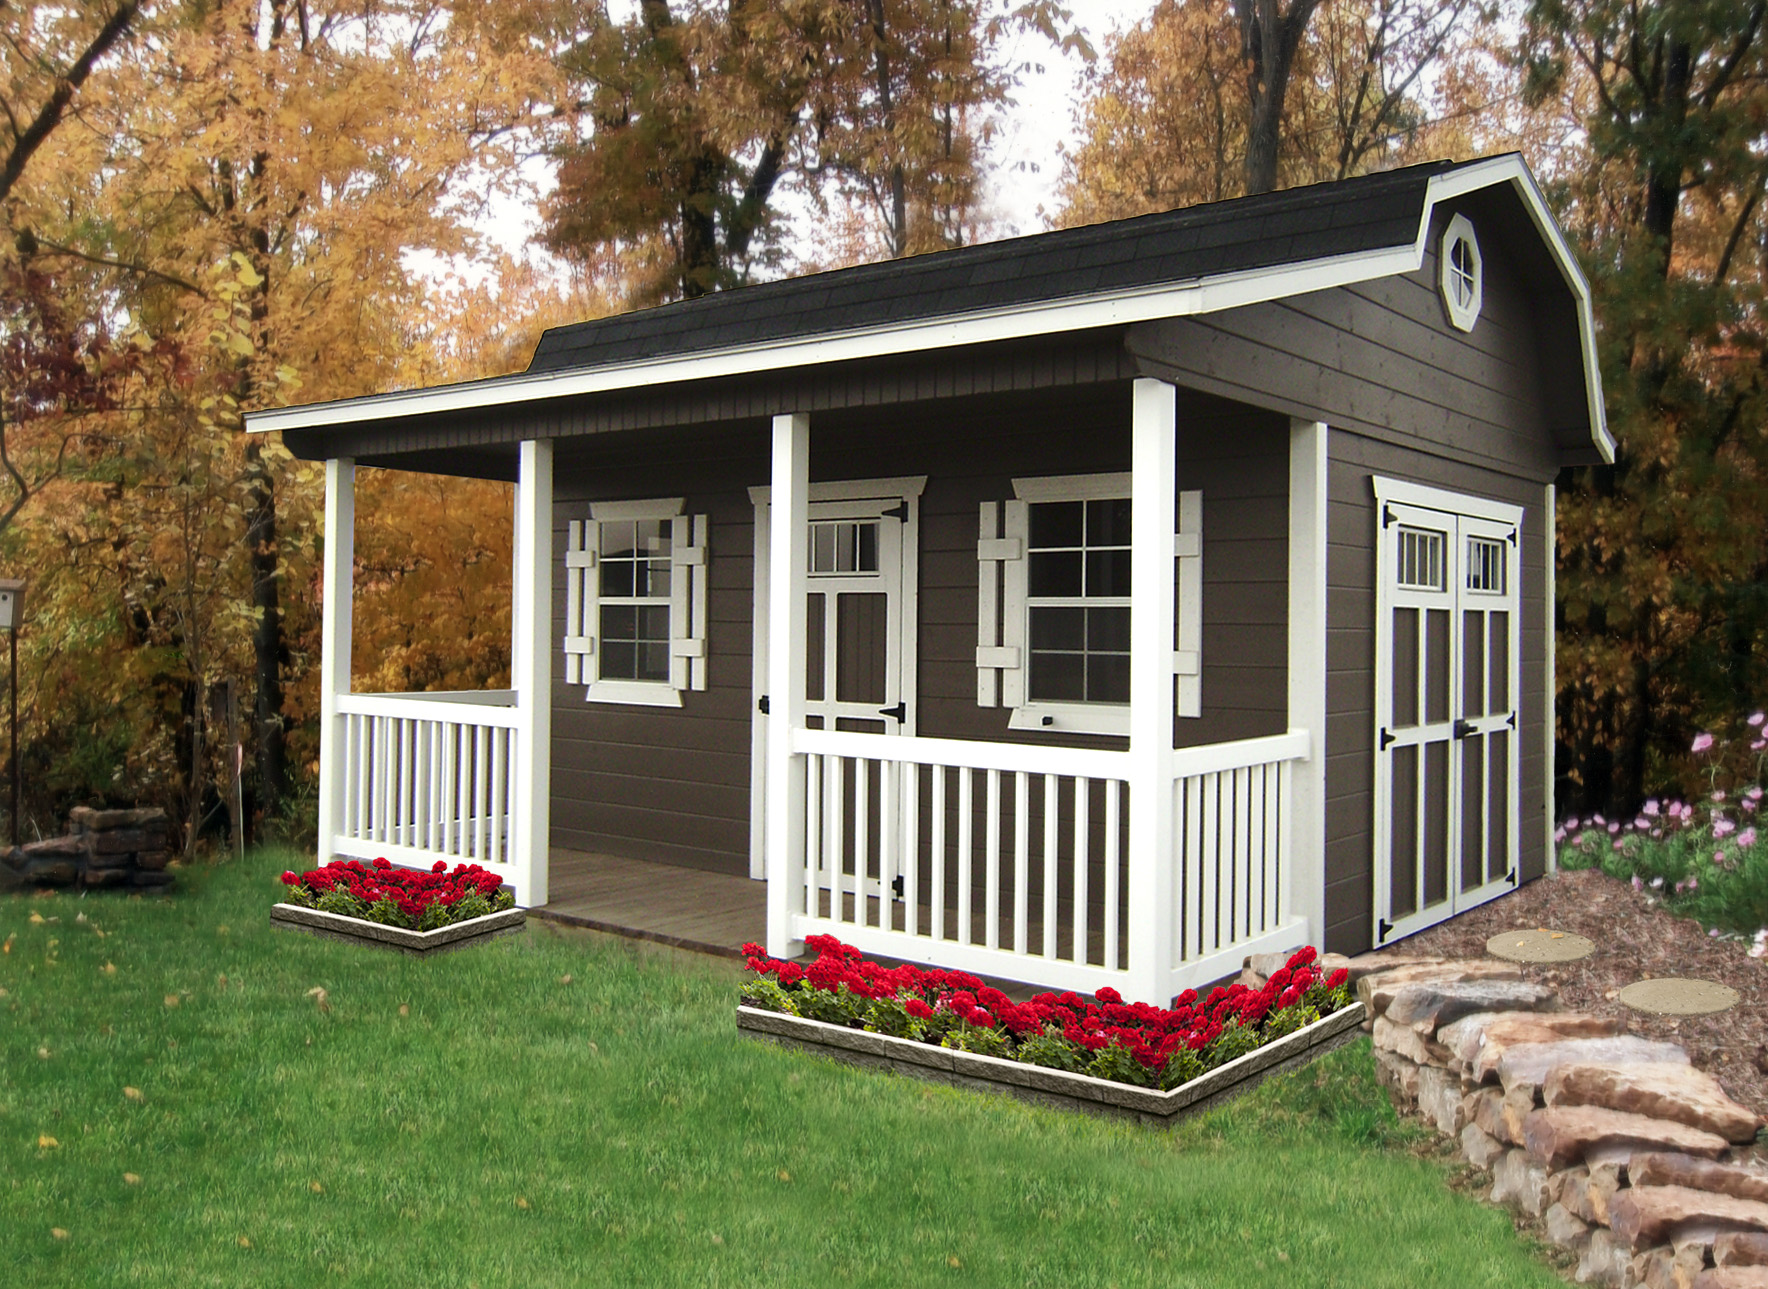 tr-1600 tuff shed tuff shed cabin, shed homes, shed cabin